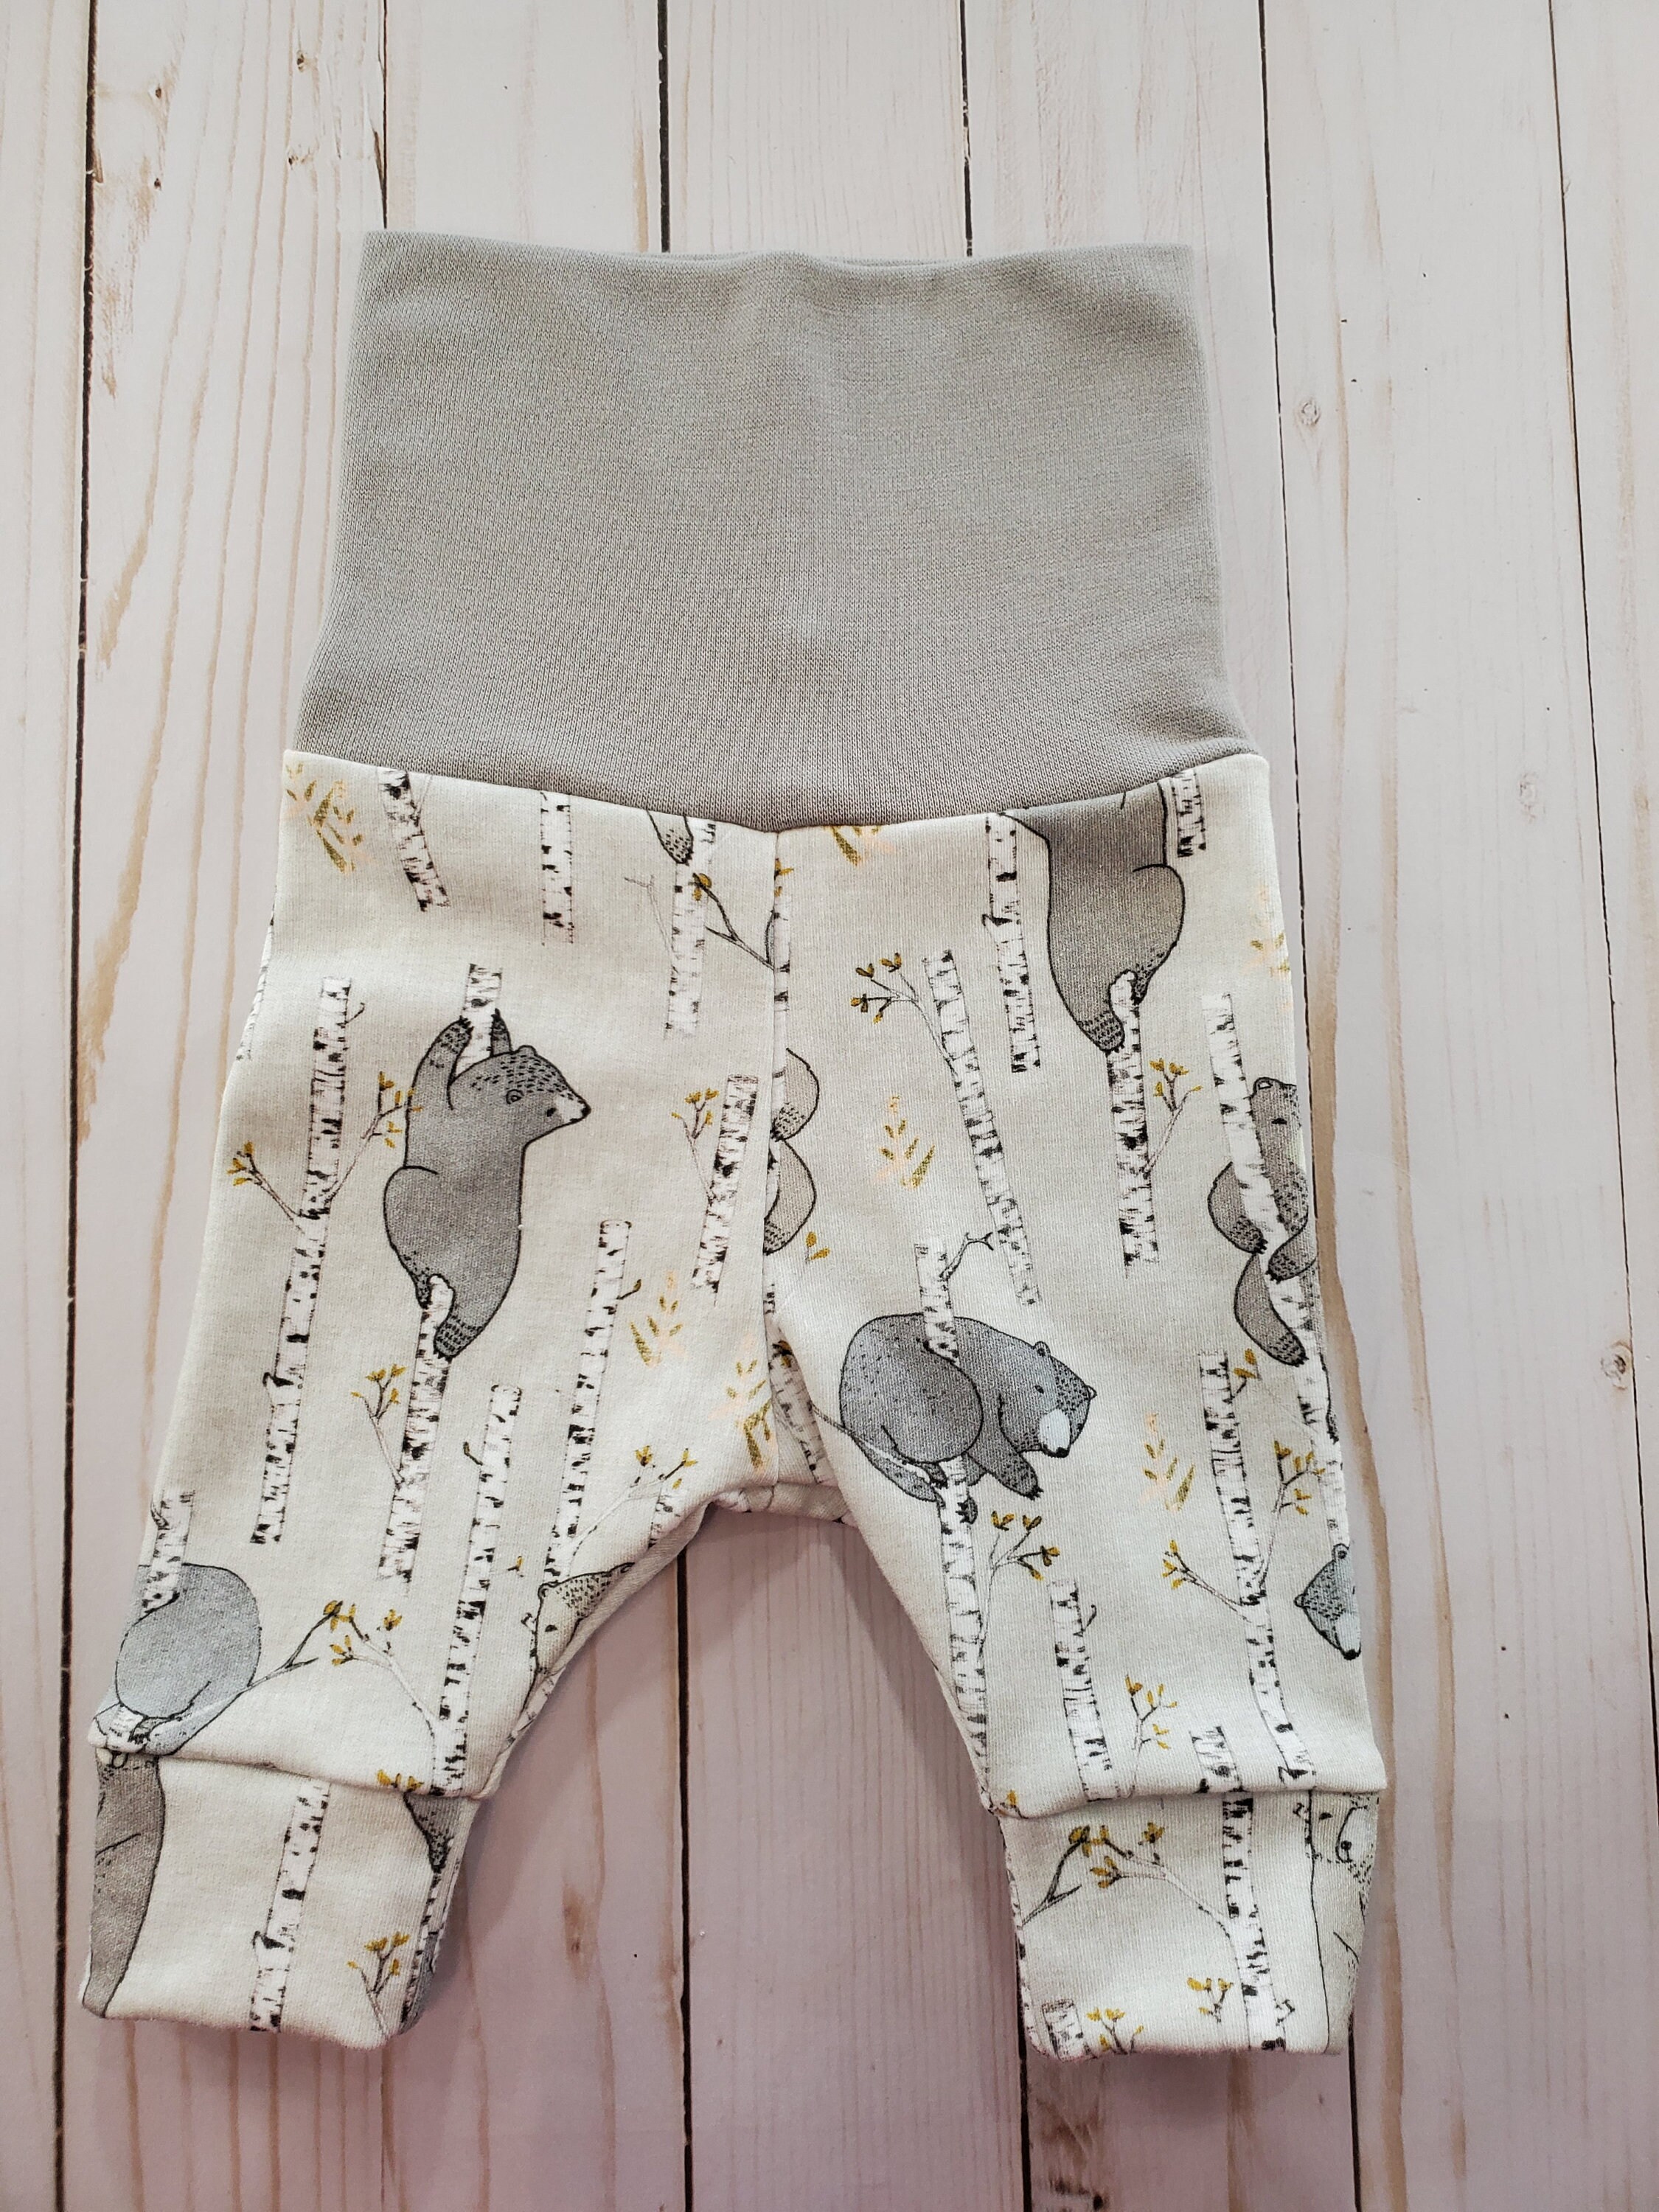 Newborn Boy Coming Home Outfit Boy Clothing Baby Kimono New | Etsy